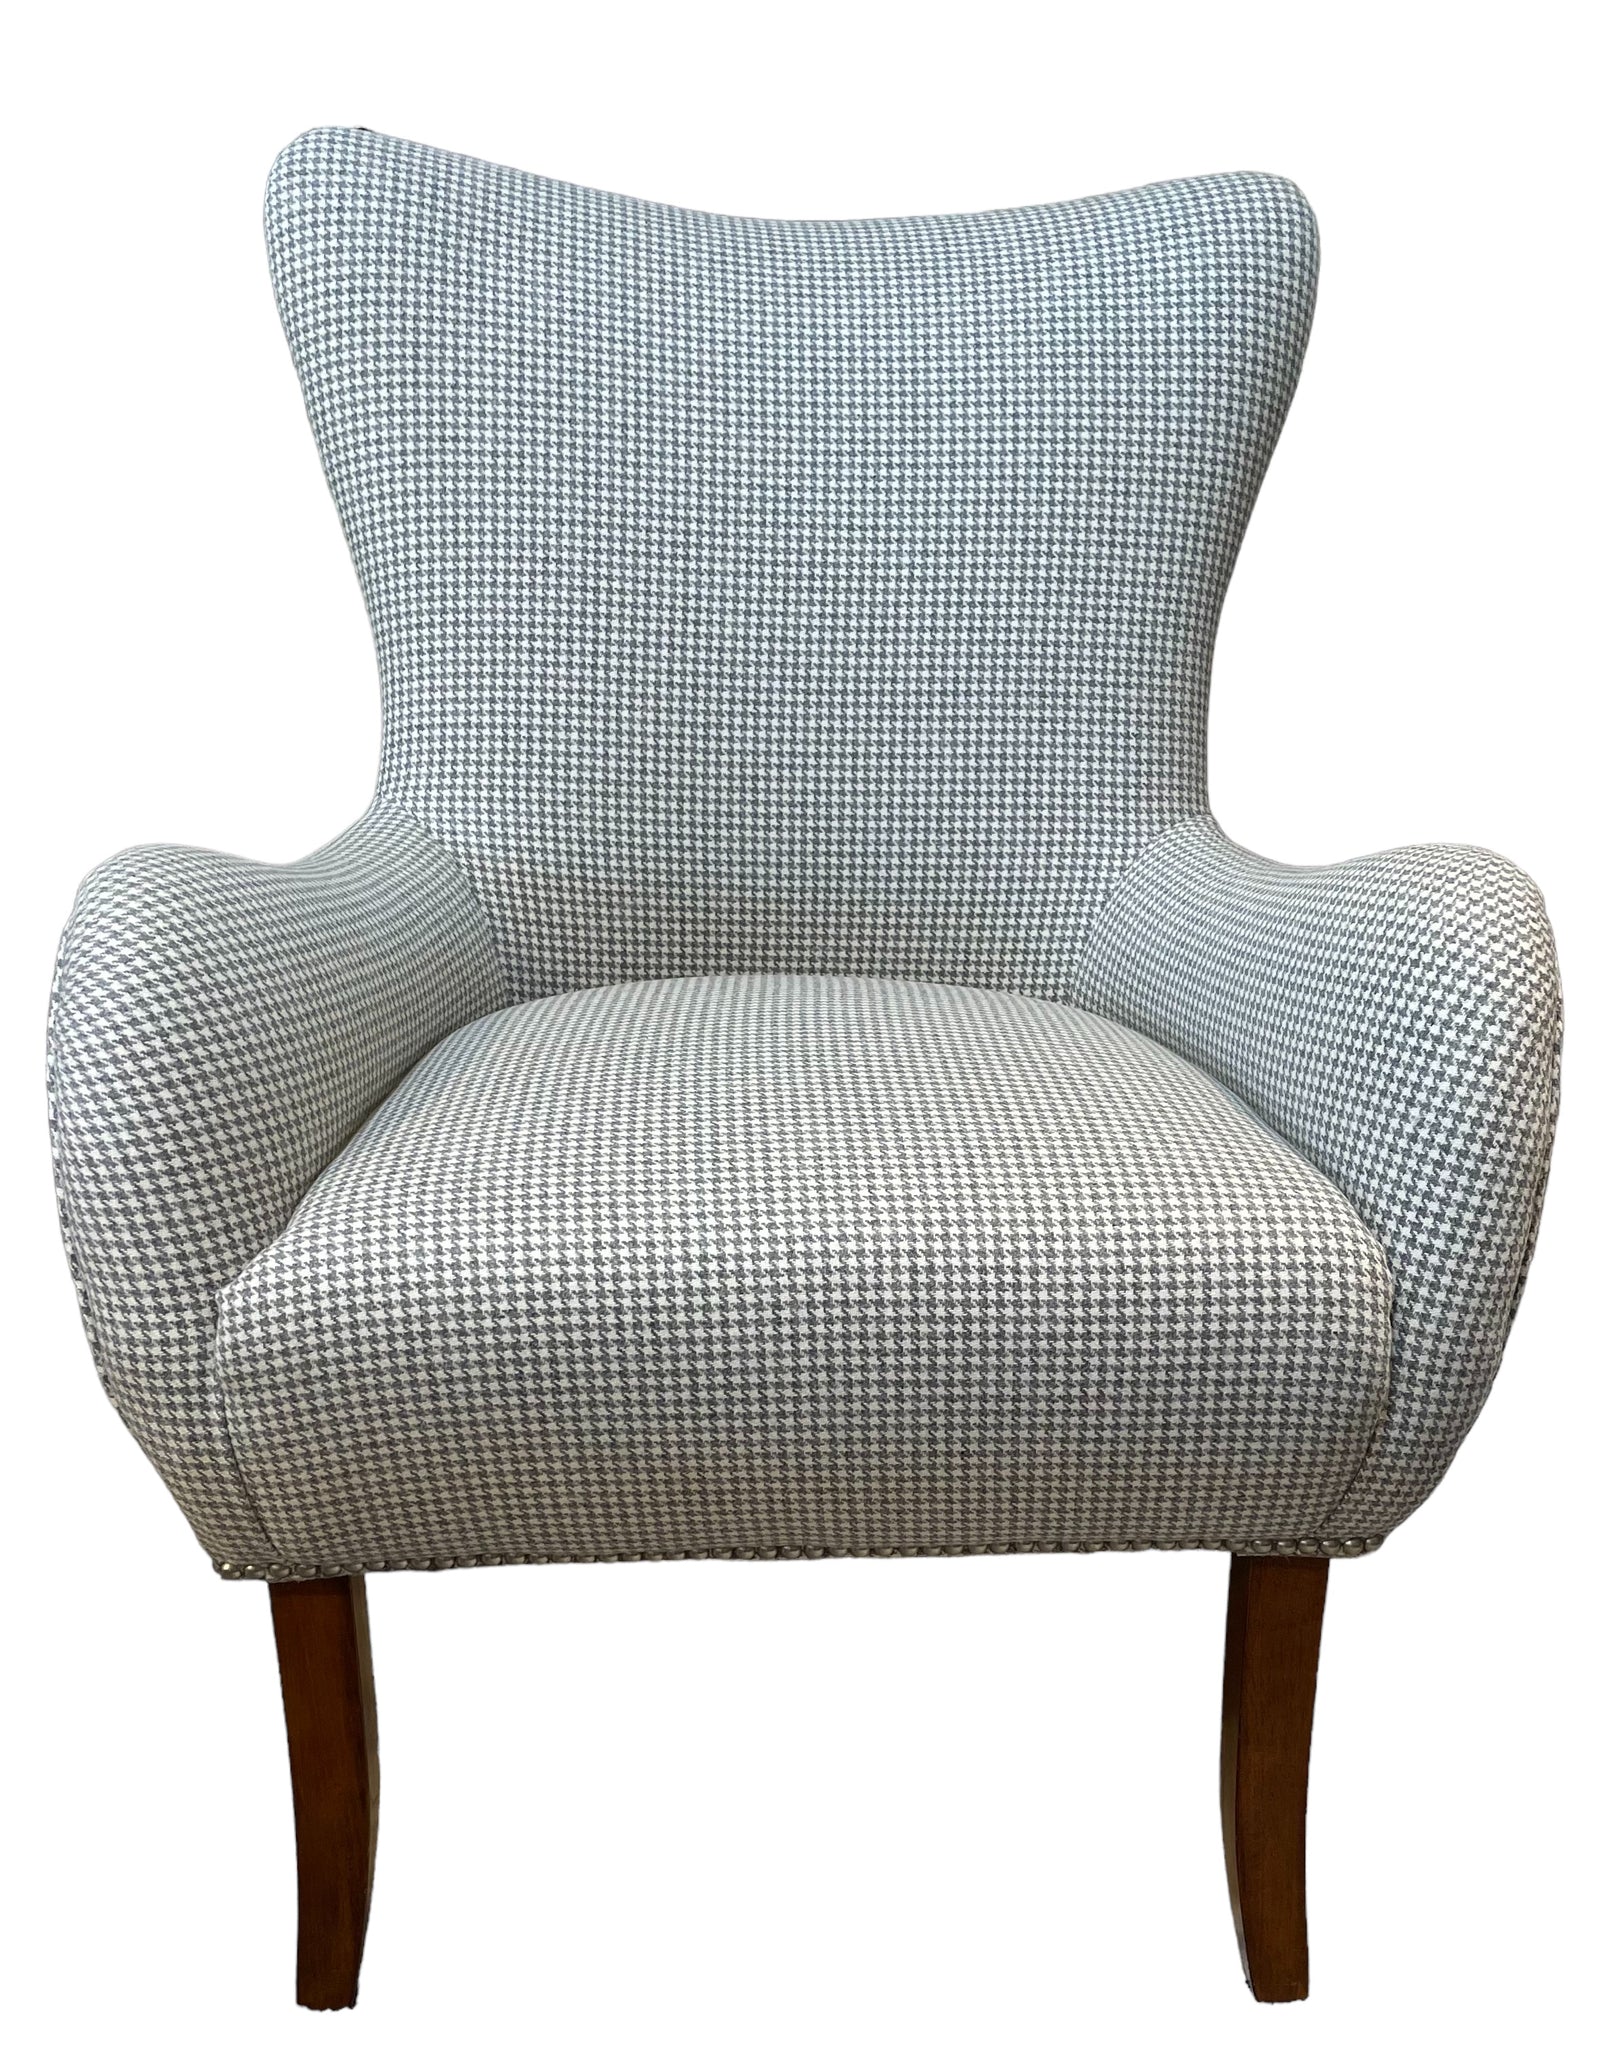 Midcentury Modern Modified Wing Chair. Newly Upholstered in Houndstooth Wool Fabric.